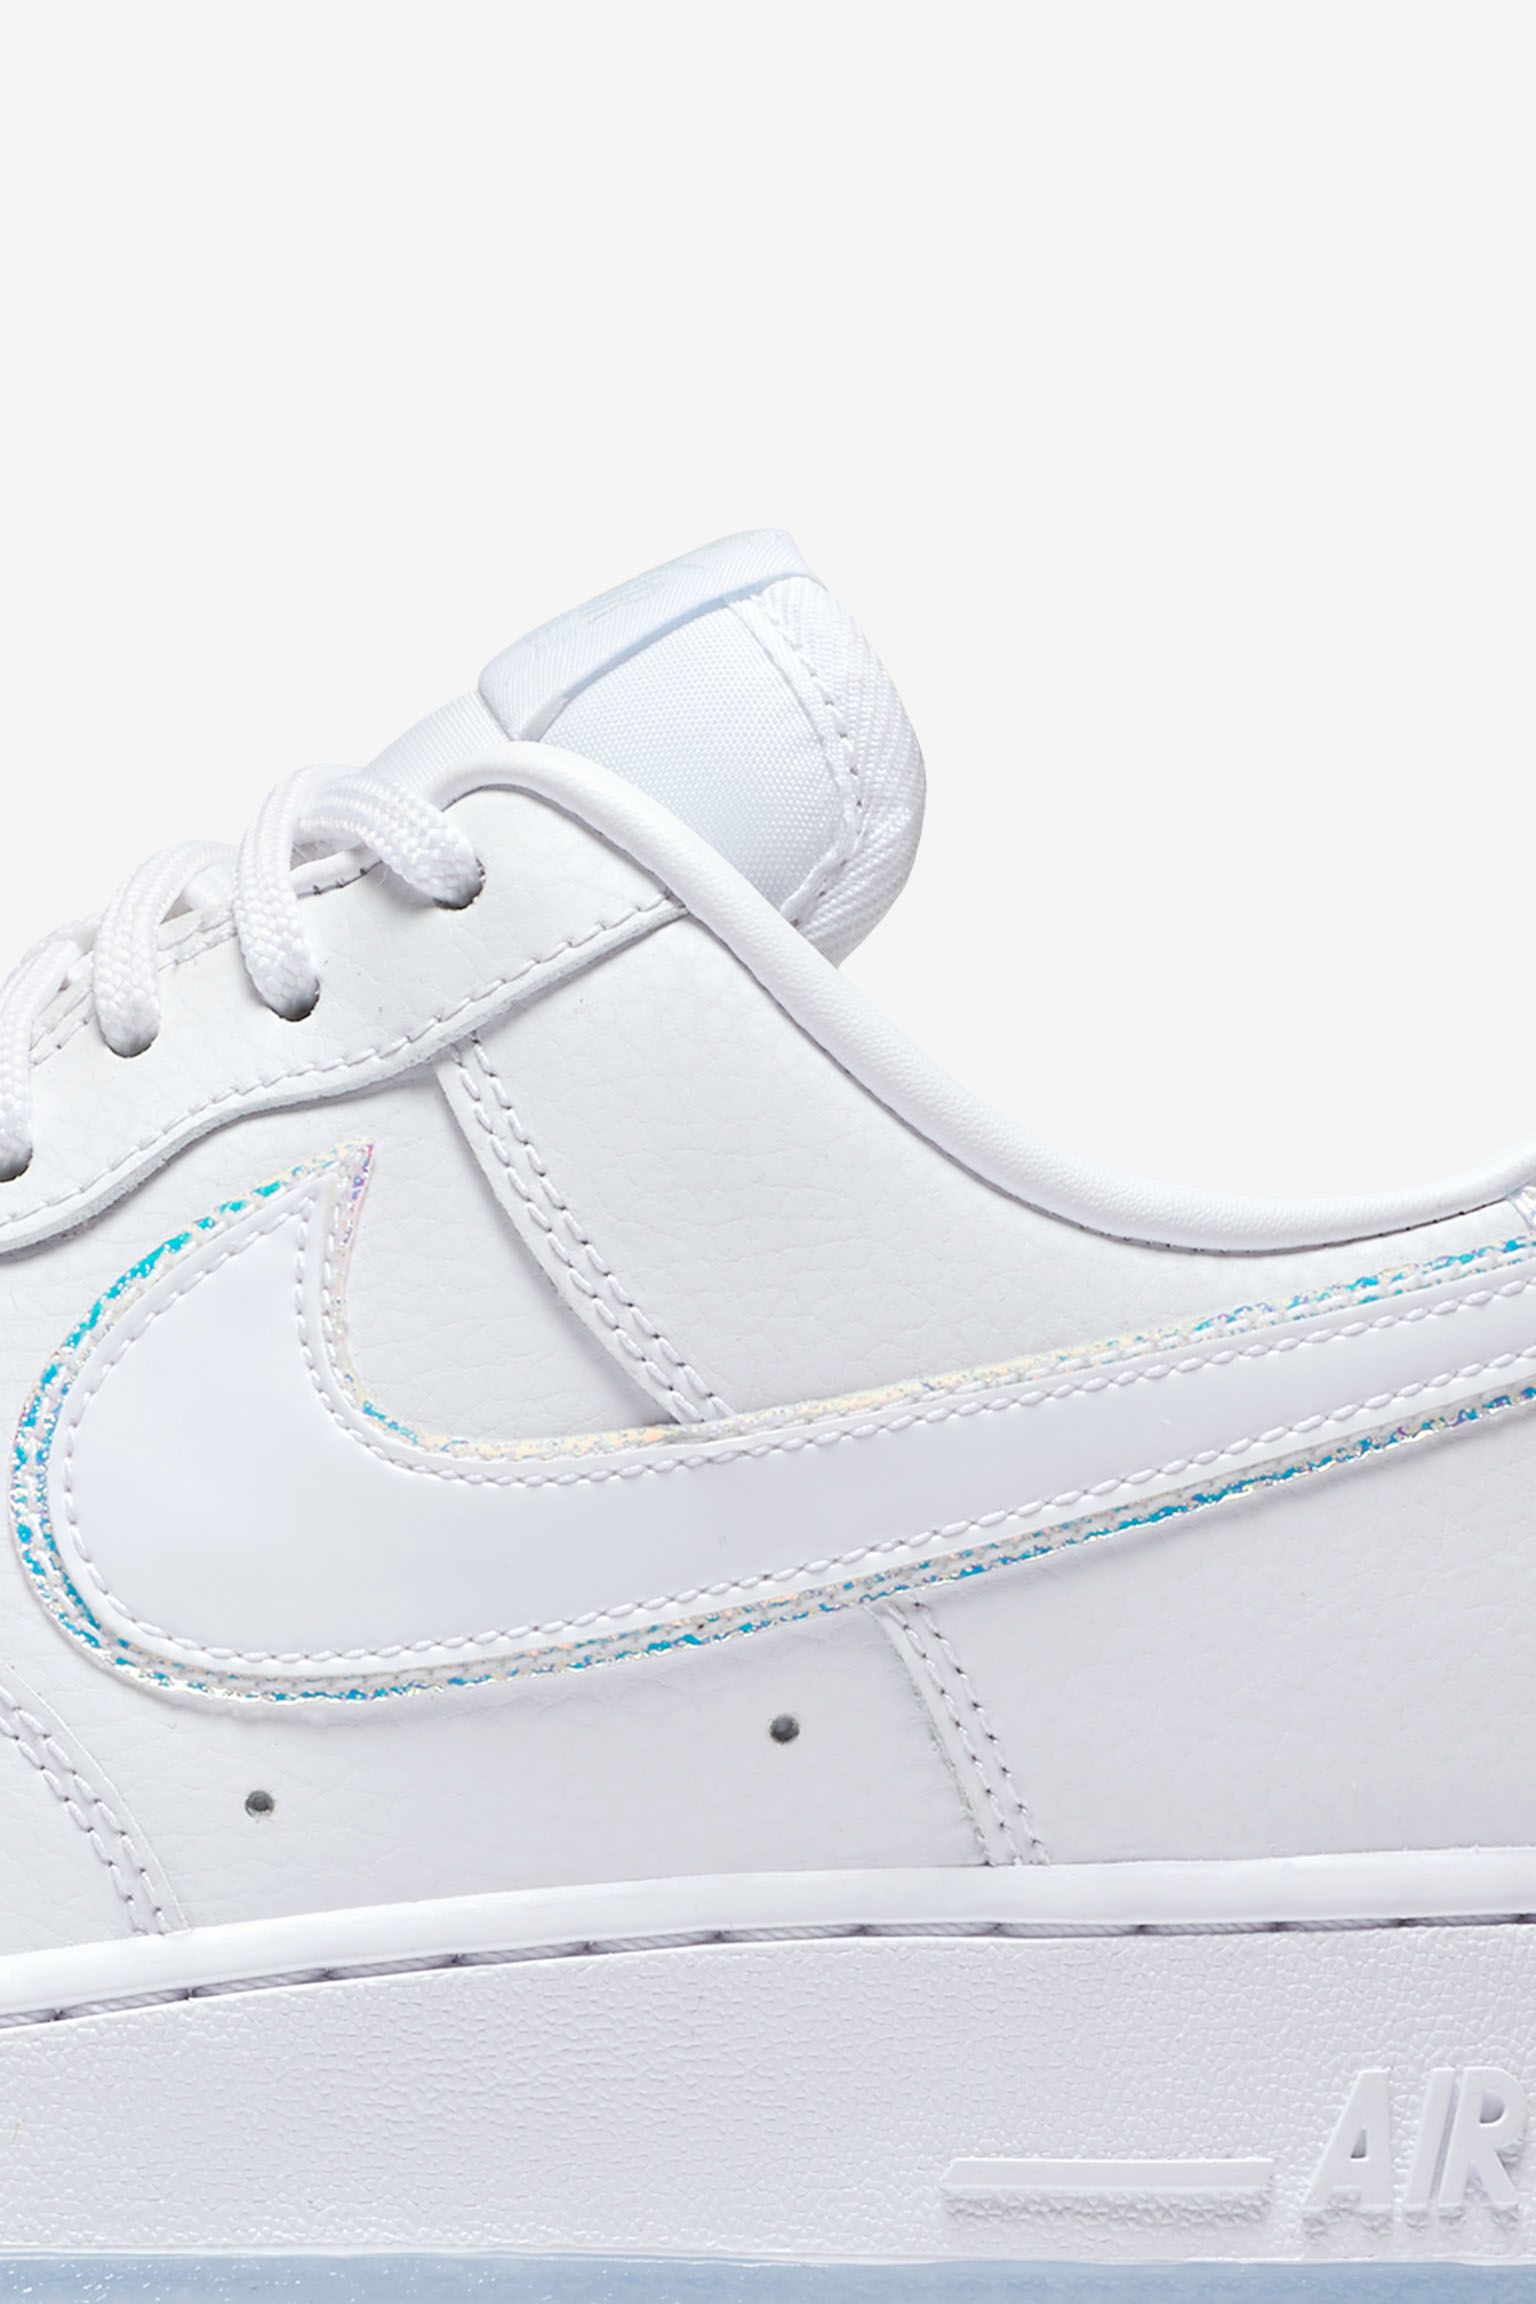 wmns air force 1 low blue tint